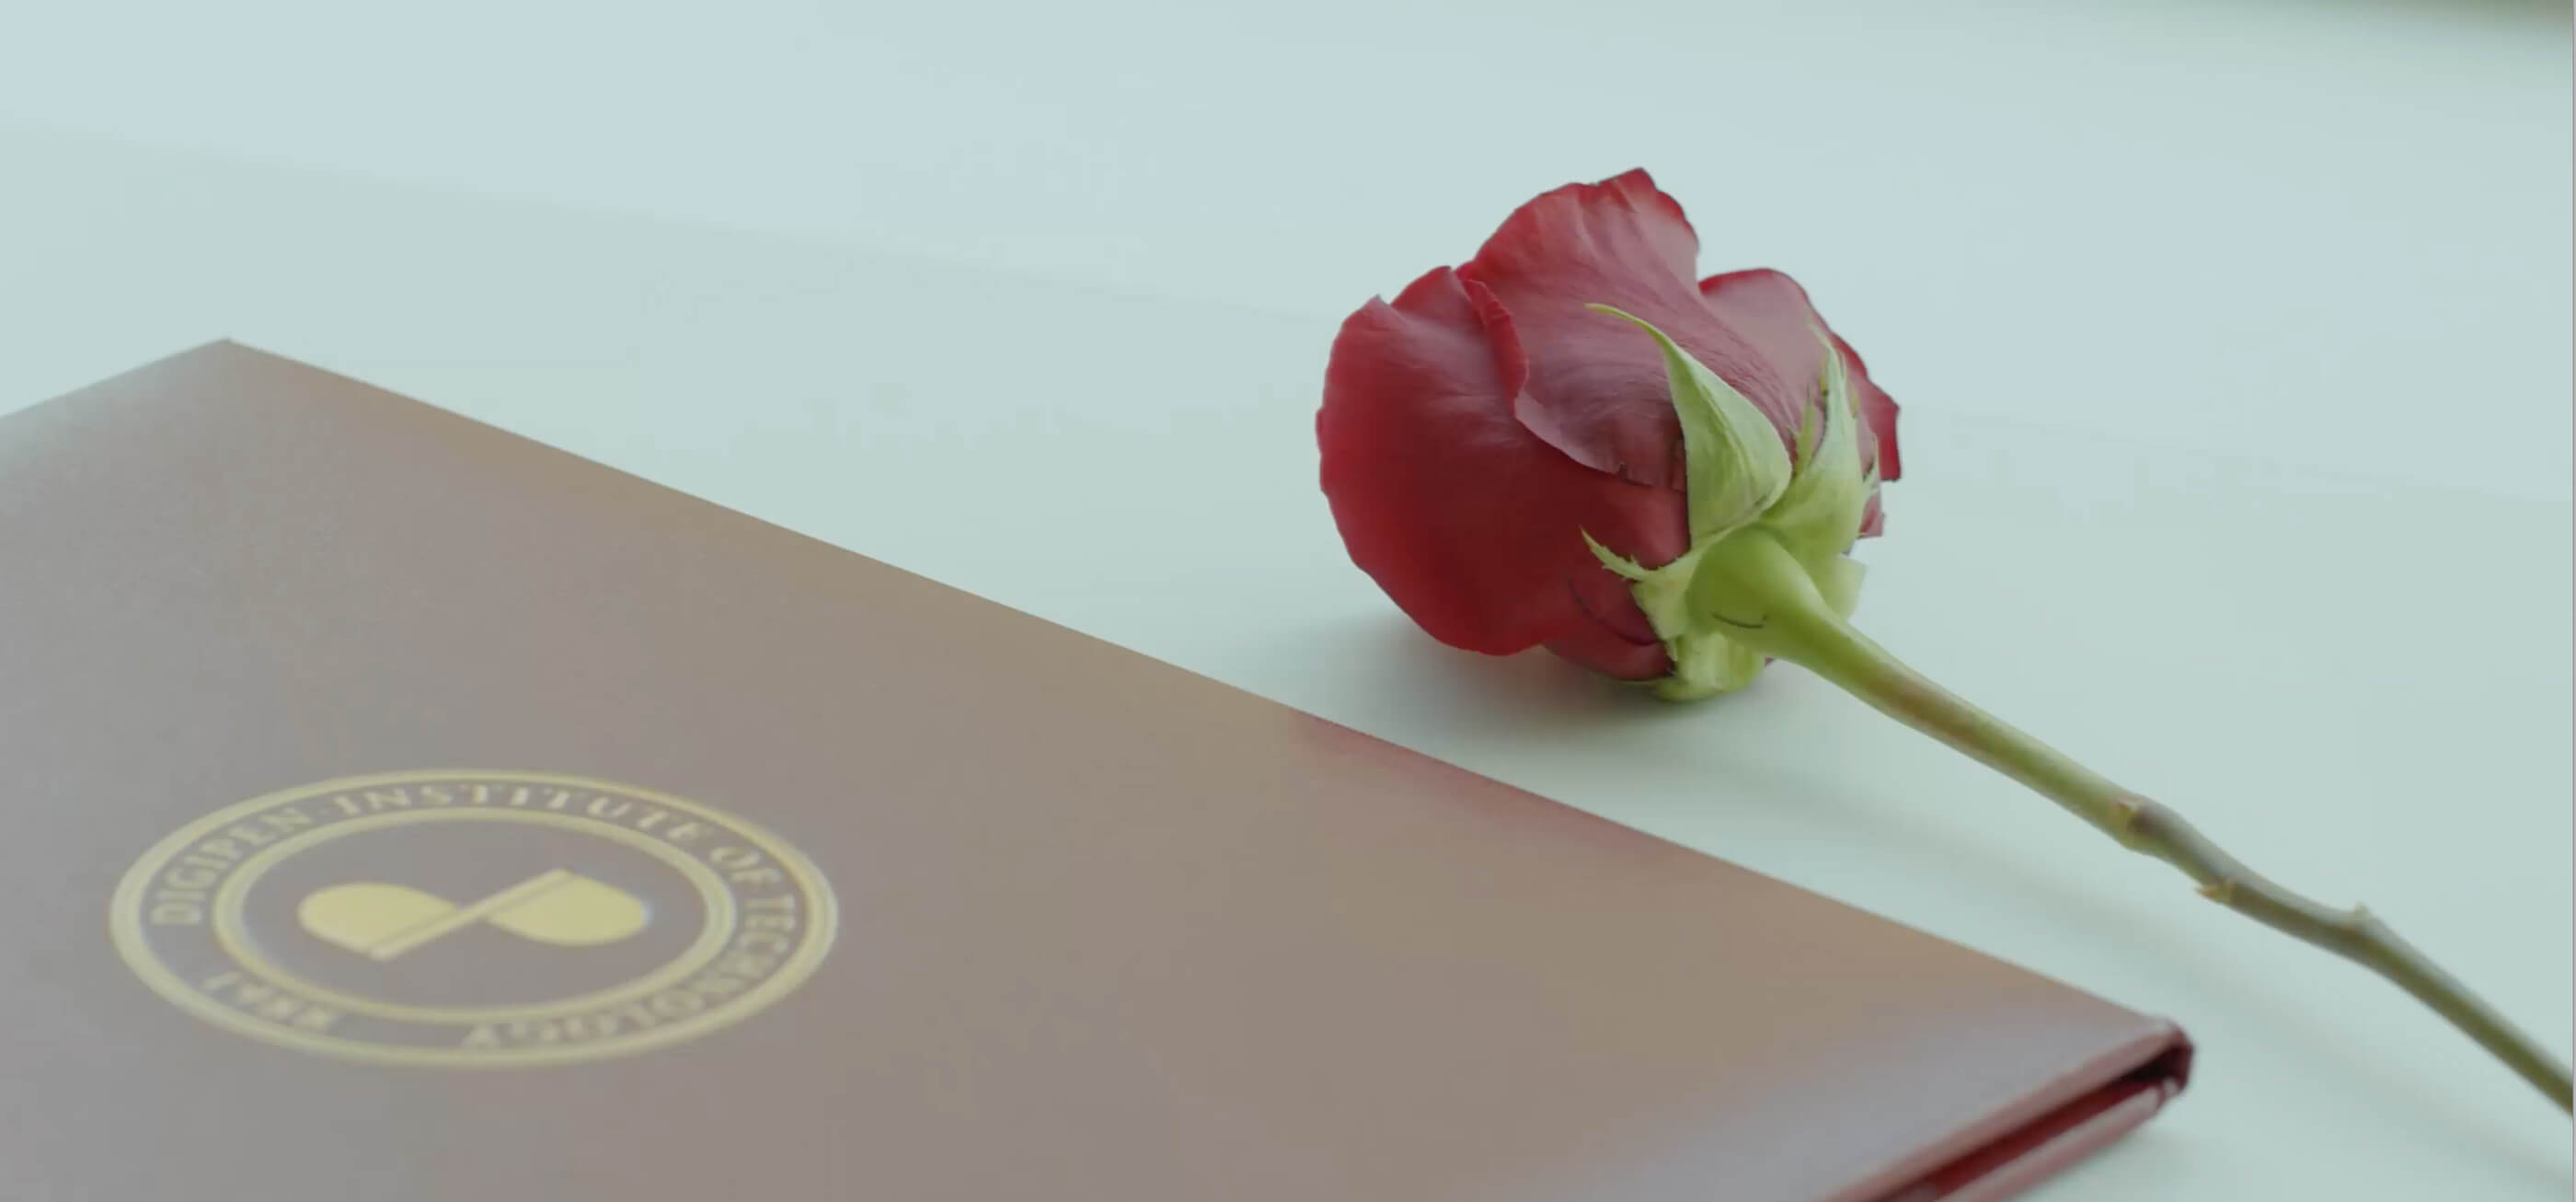 A red rose lays next to a leather DigiPen folder.